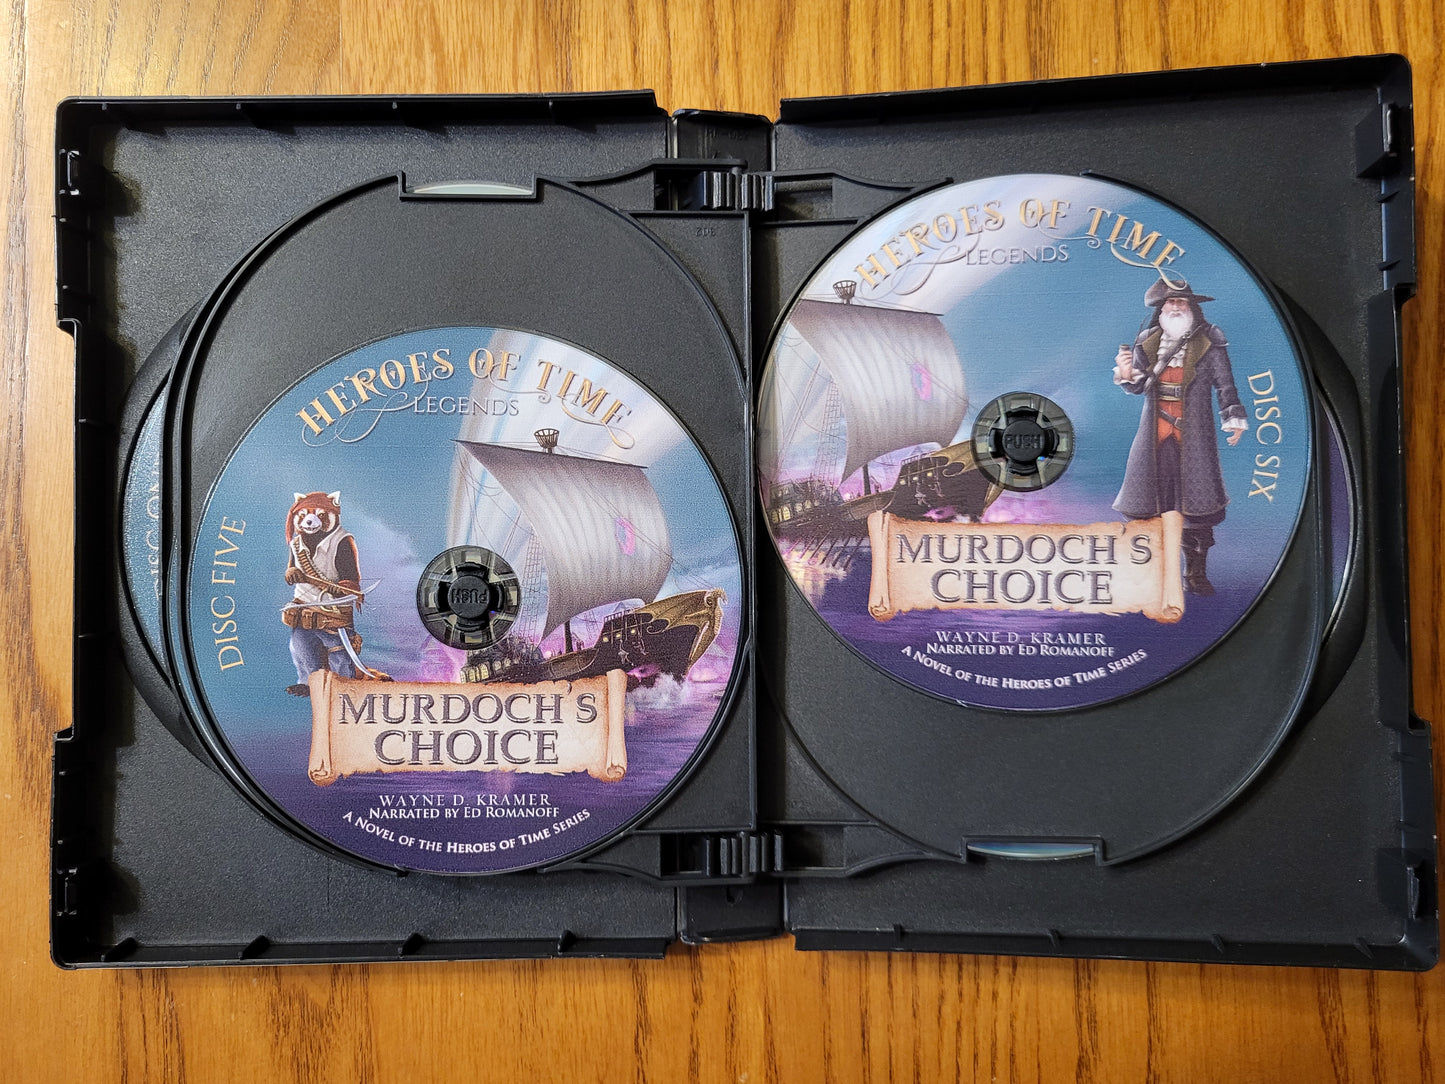 Murdoch's Choice Audiobook CD Discs 5 and 6, featuring Boomer and Seadread art